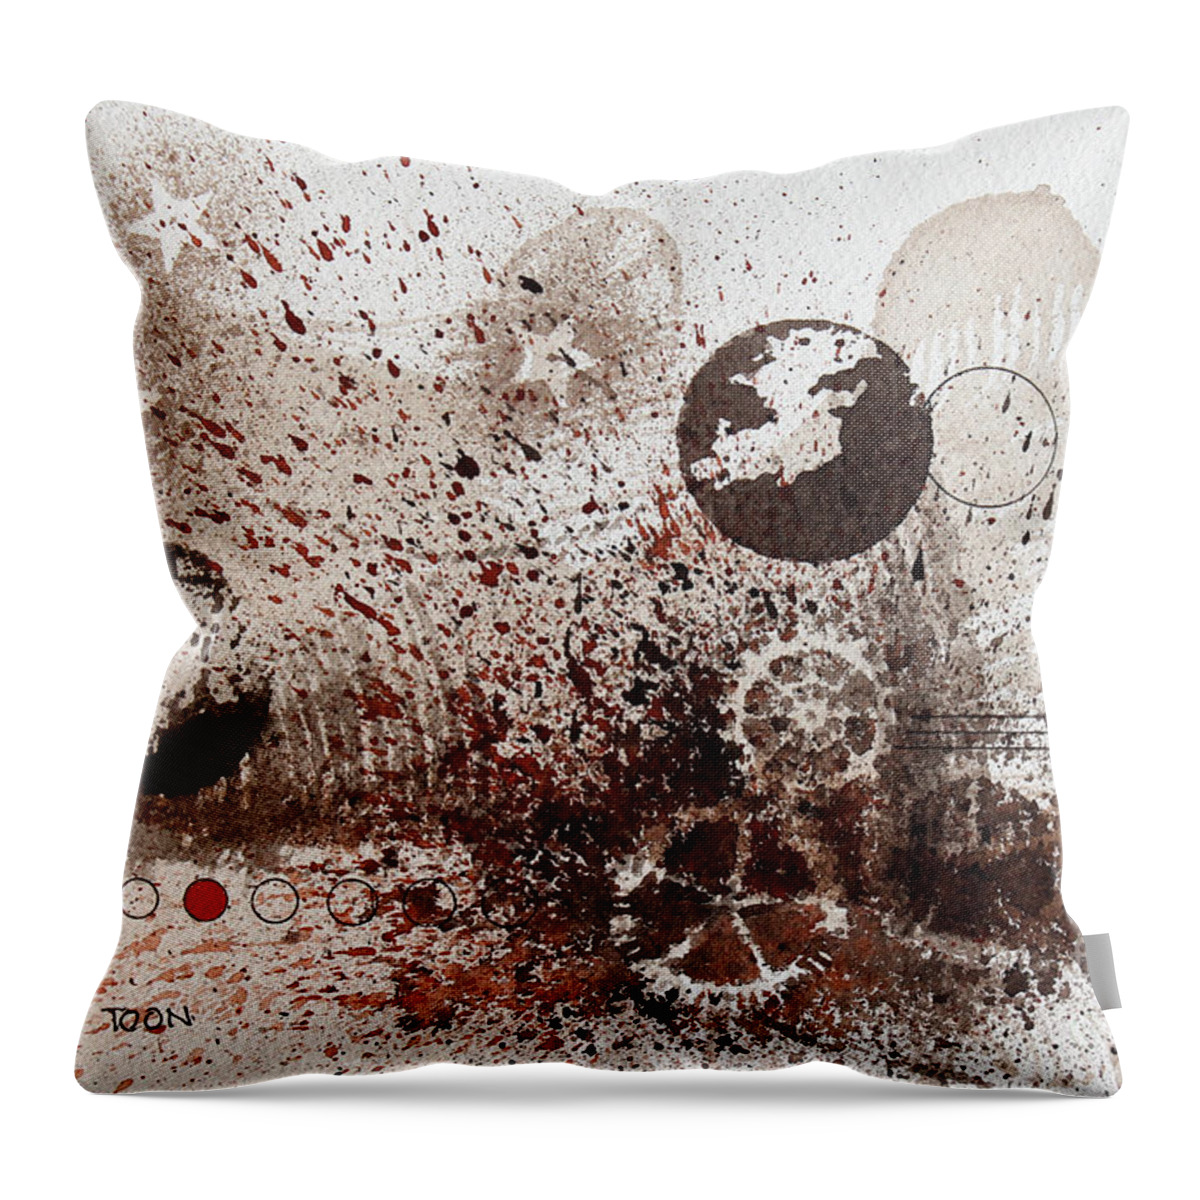 An Abstract In Sepia Tones. Throw Pillow featuring the painting Days Of Old by Monte Toon